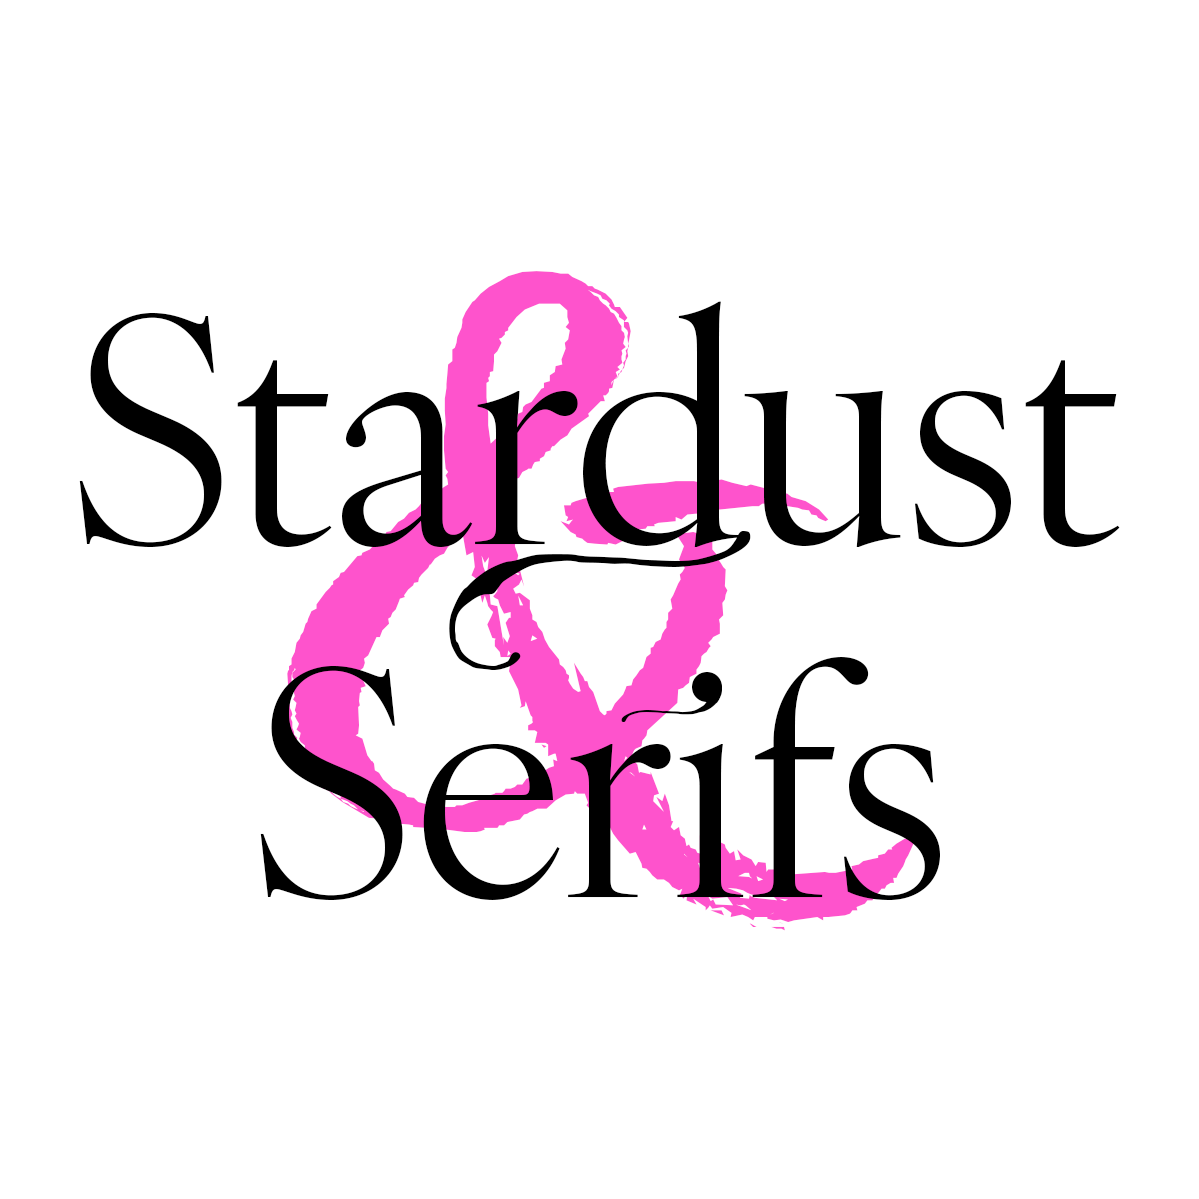 Stardust & Serifs logo with black text over pink ampersand